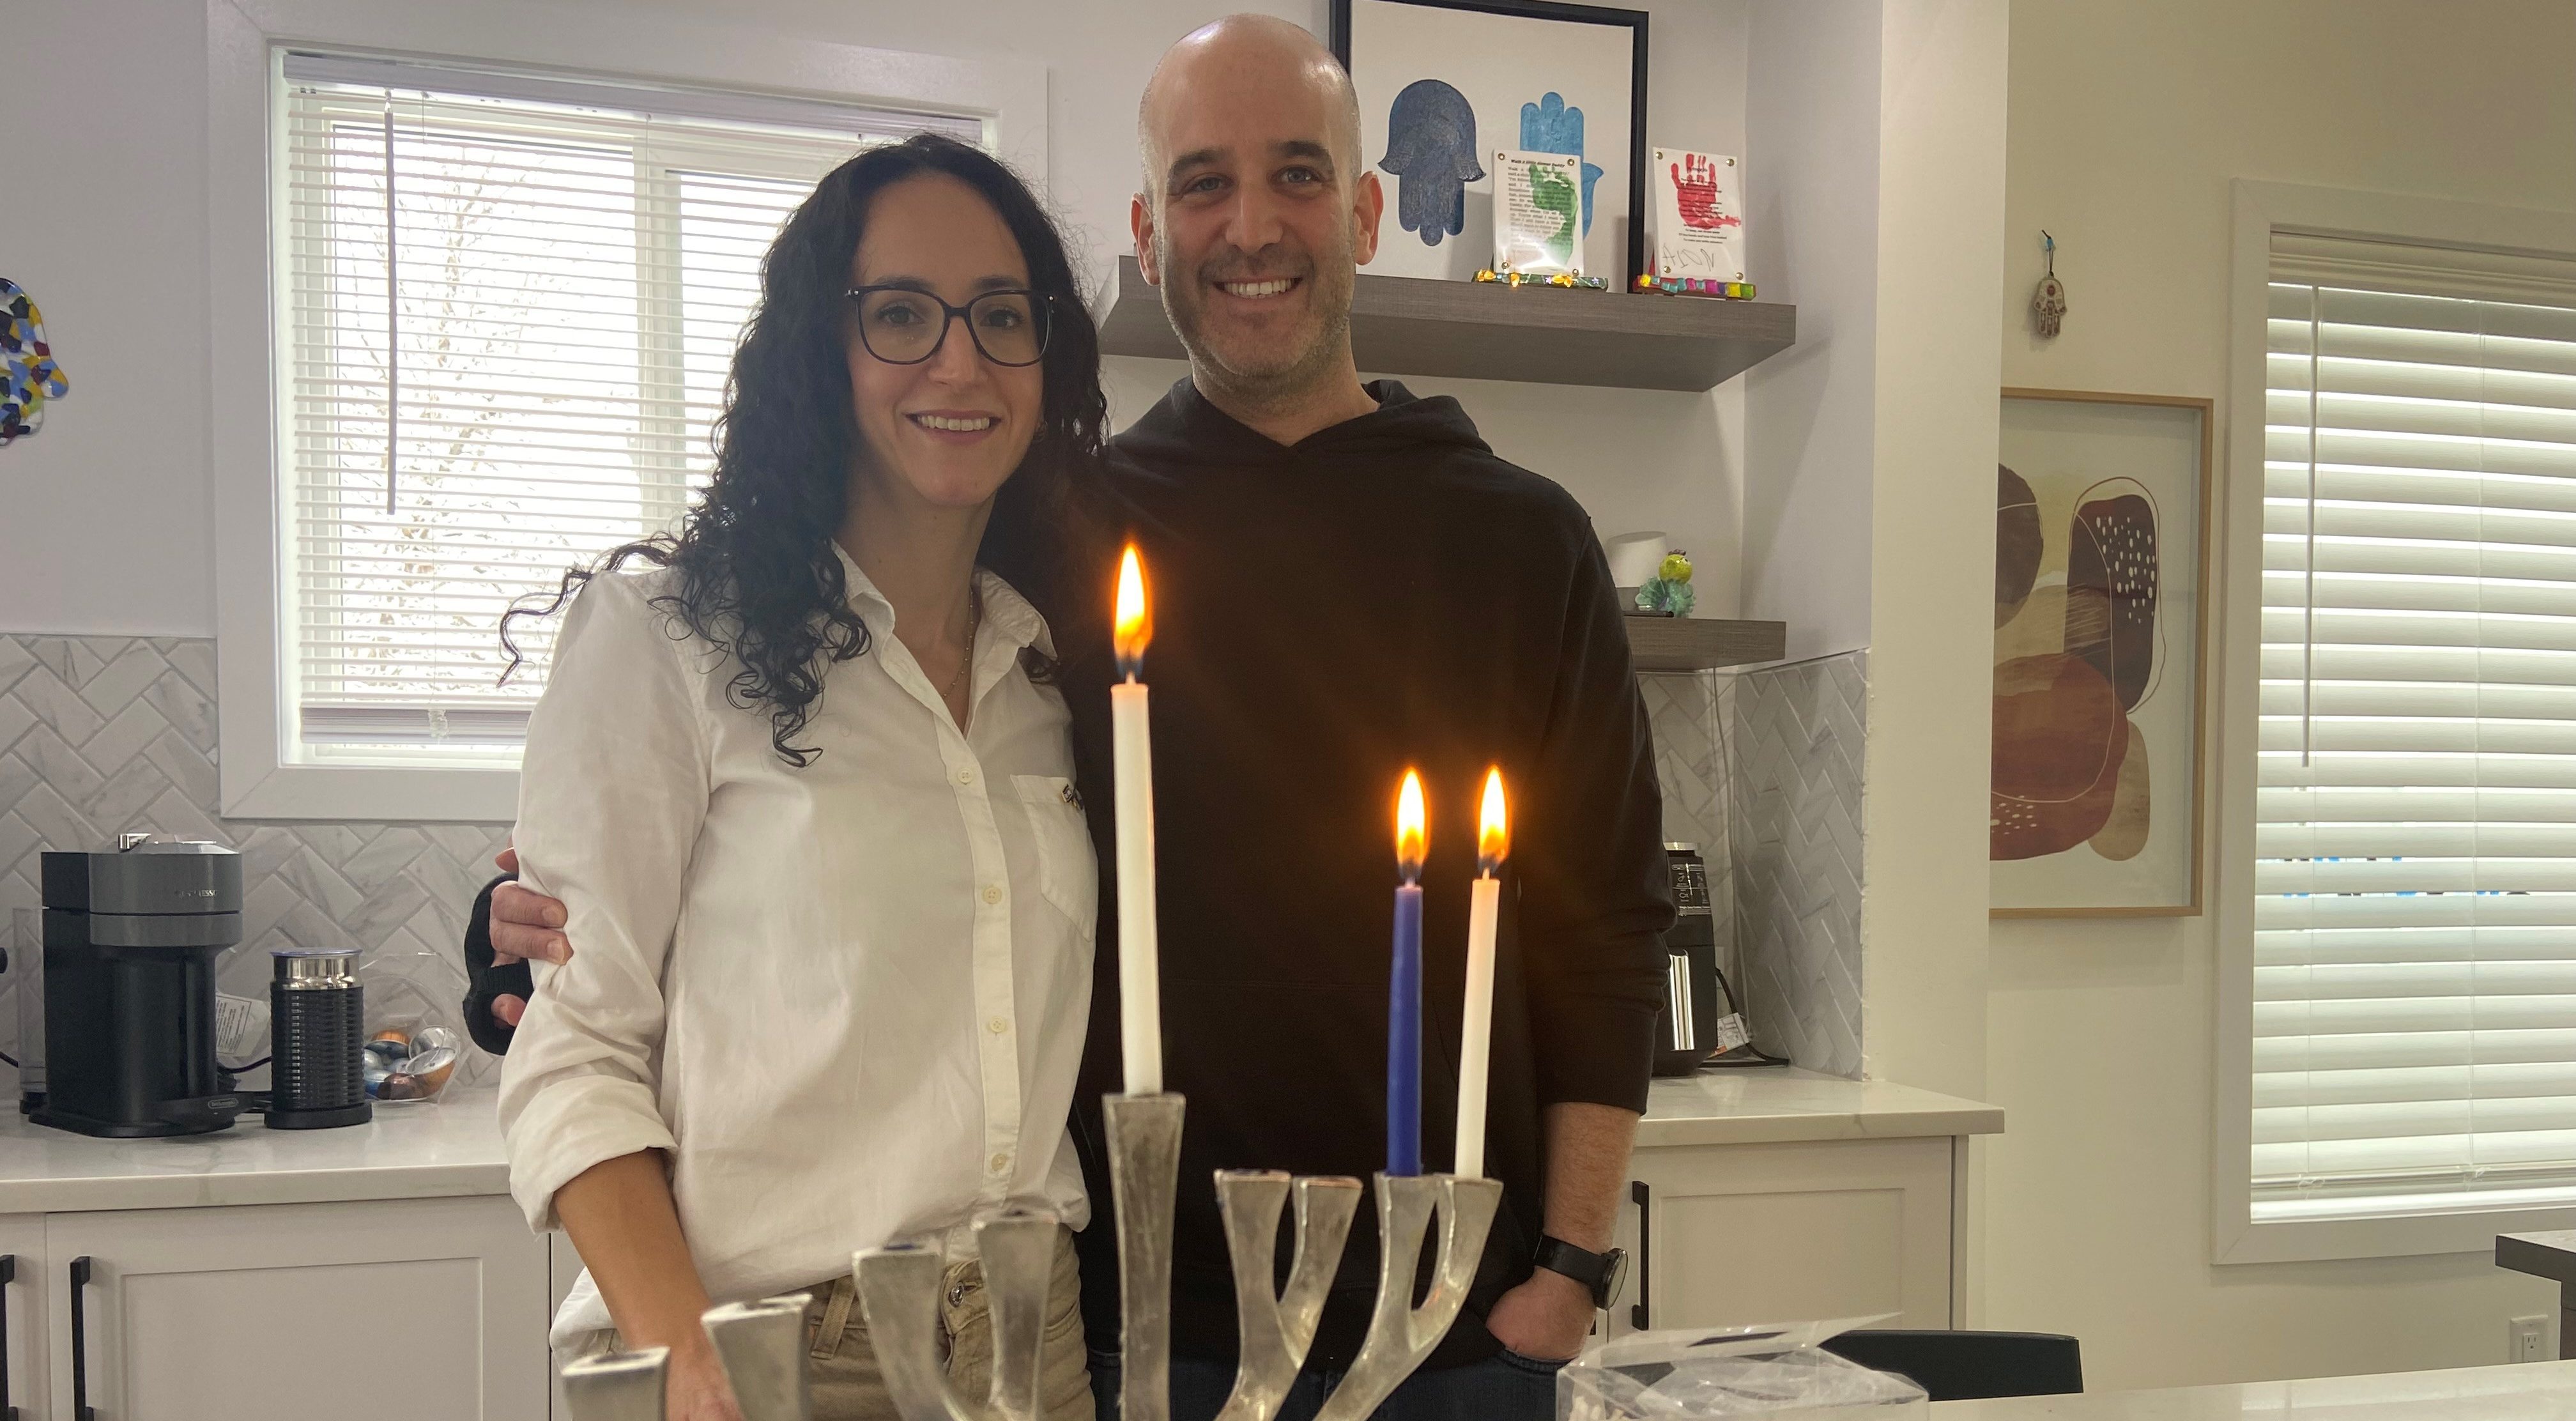 Hanukkah celebrations ‘difficult’ for Calgary Jewish couple worried about loved ones in Israel